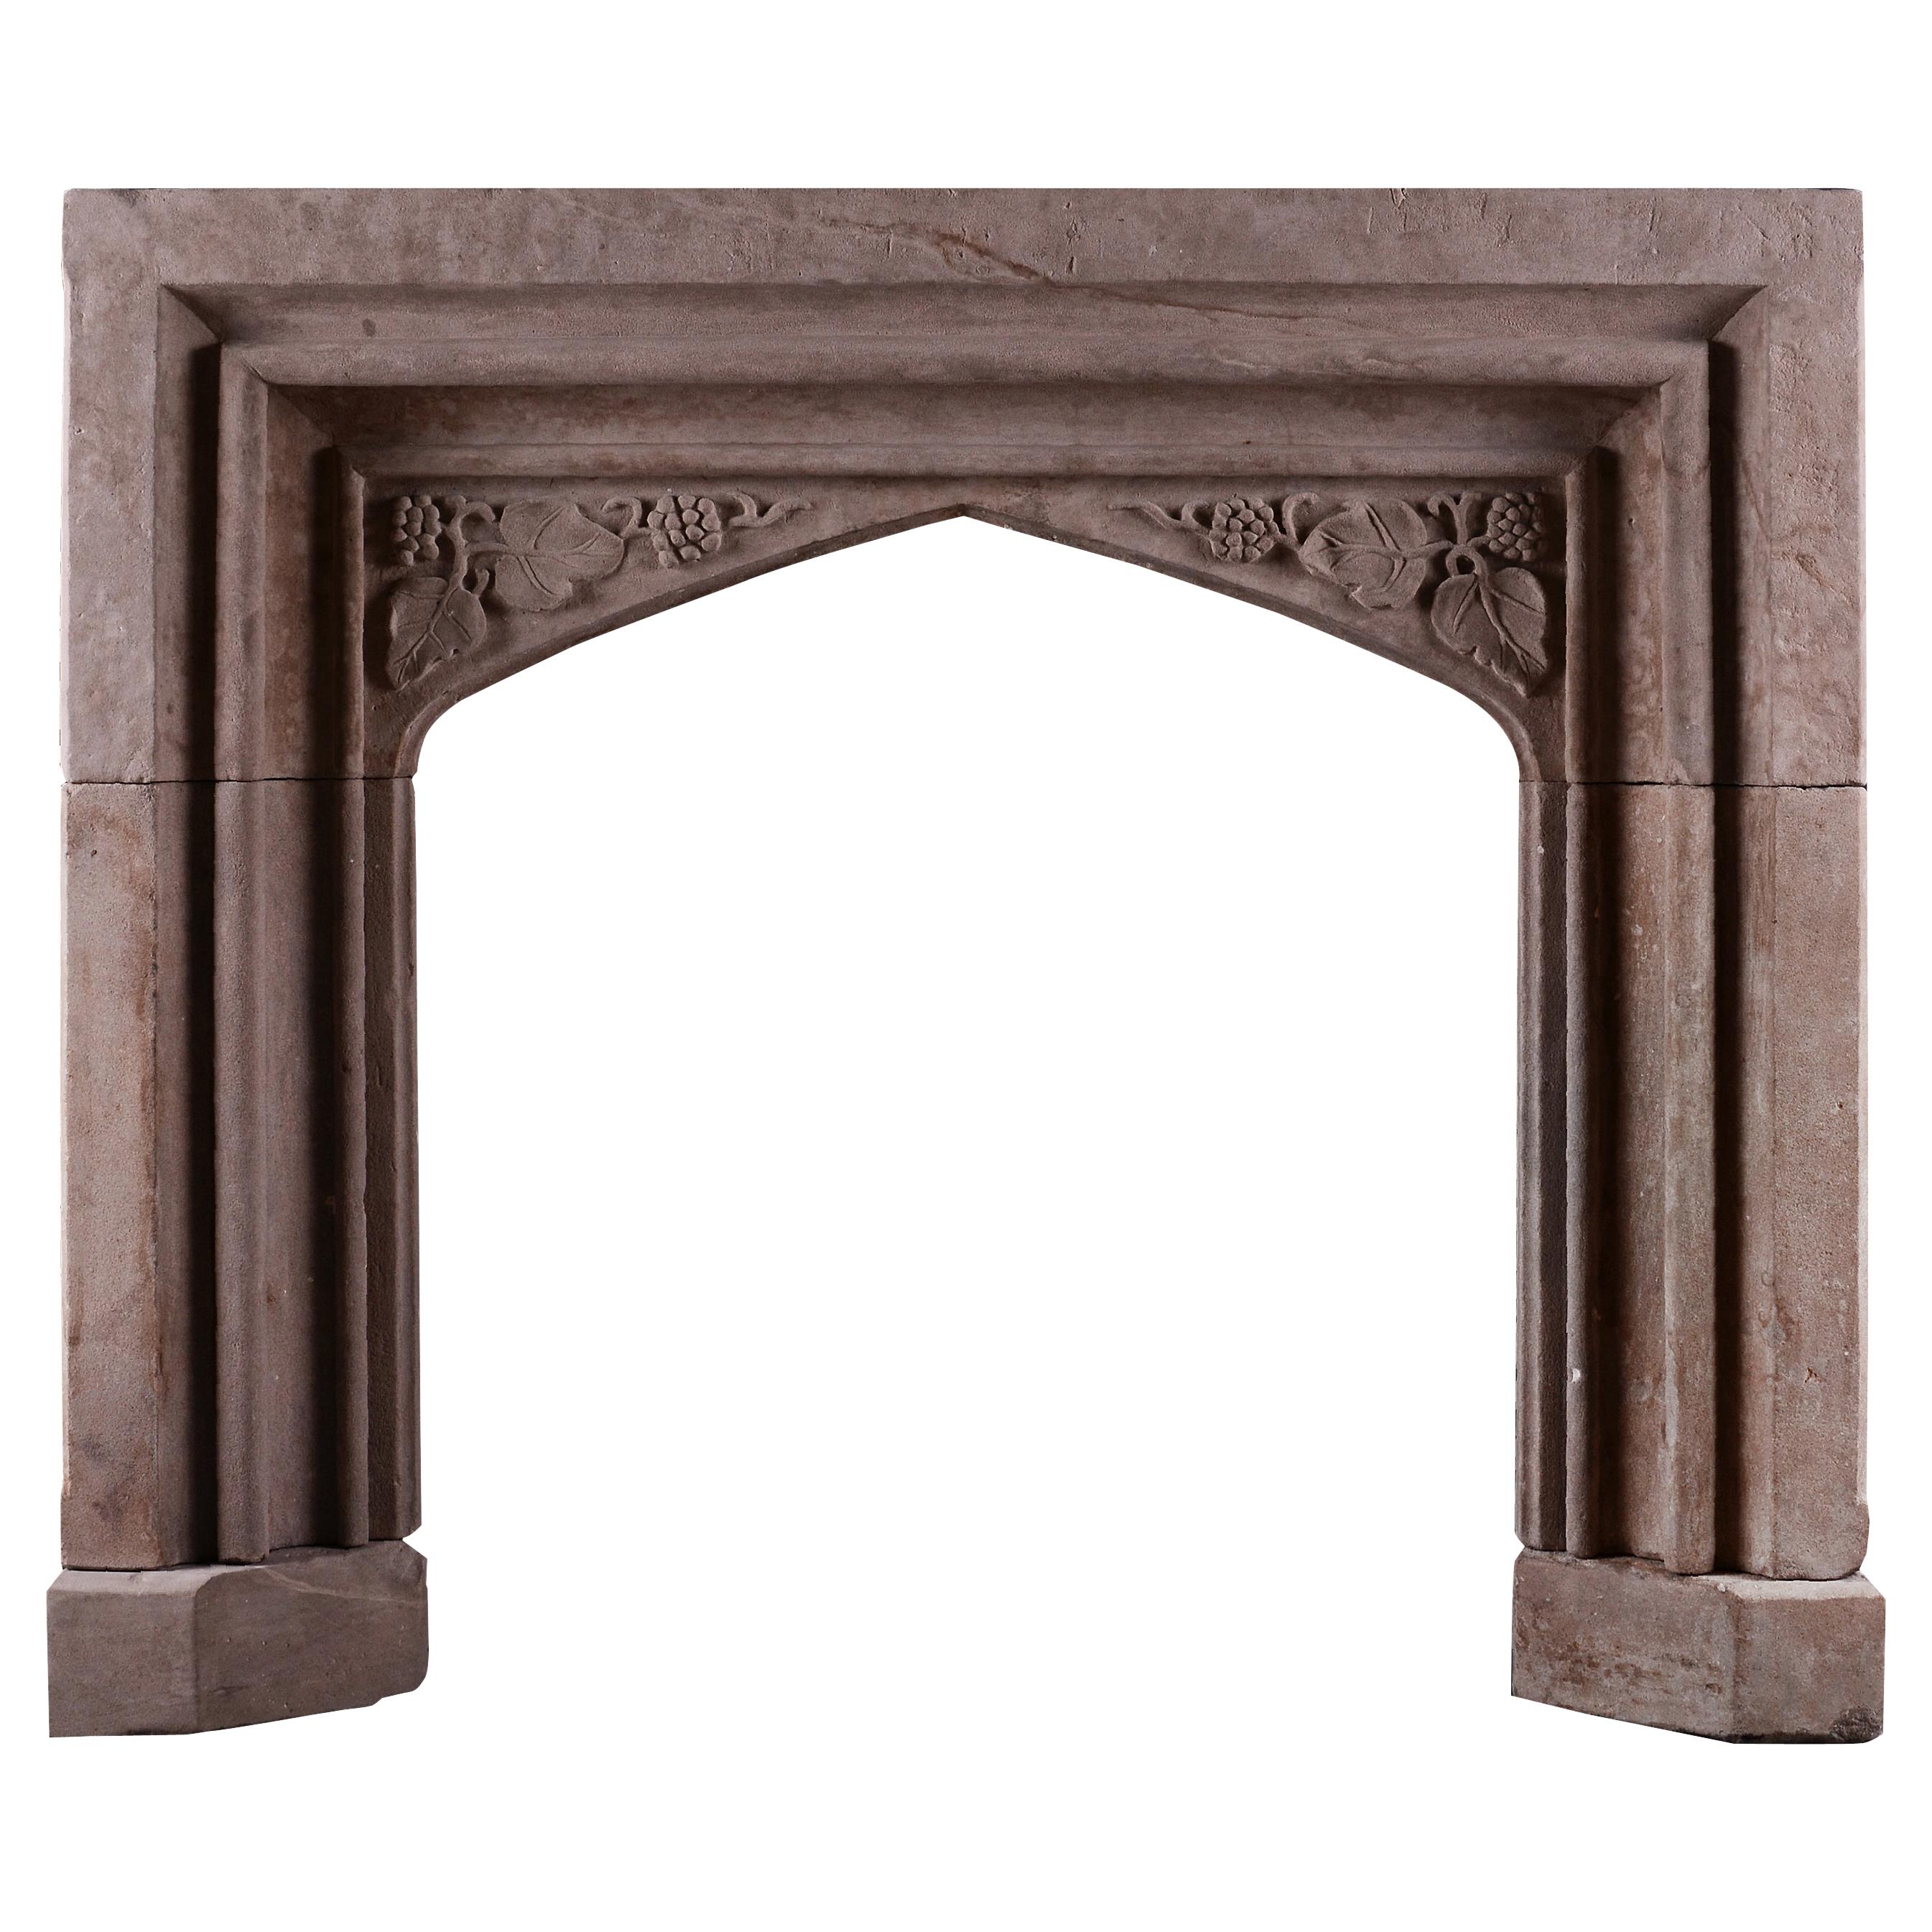 An Early Victorian Carved Stone Fireplace In The Gothic Style For Sale